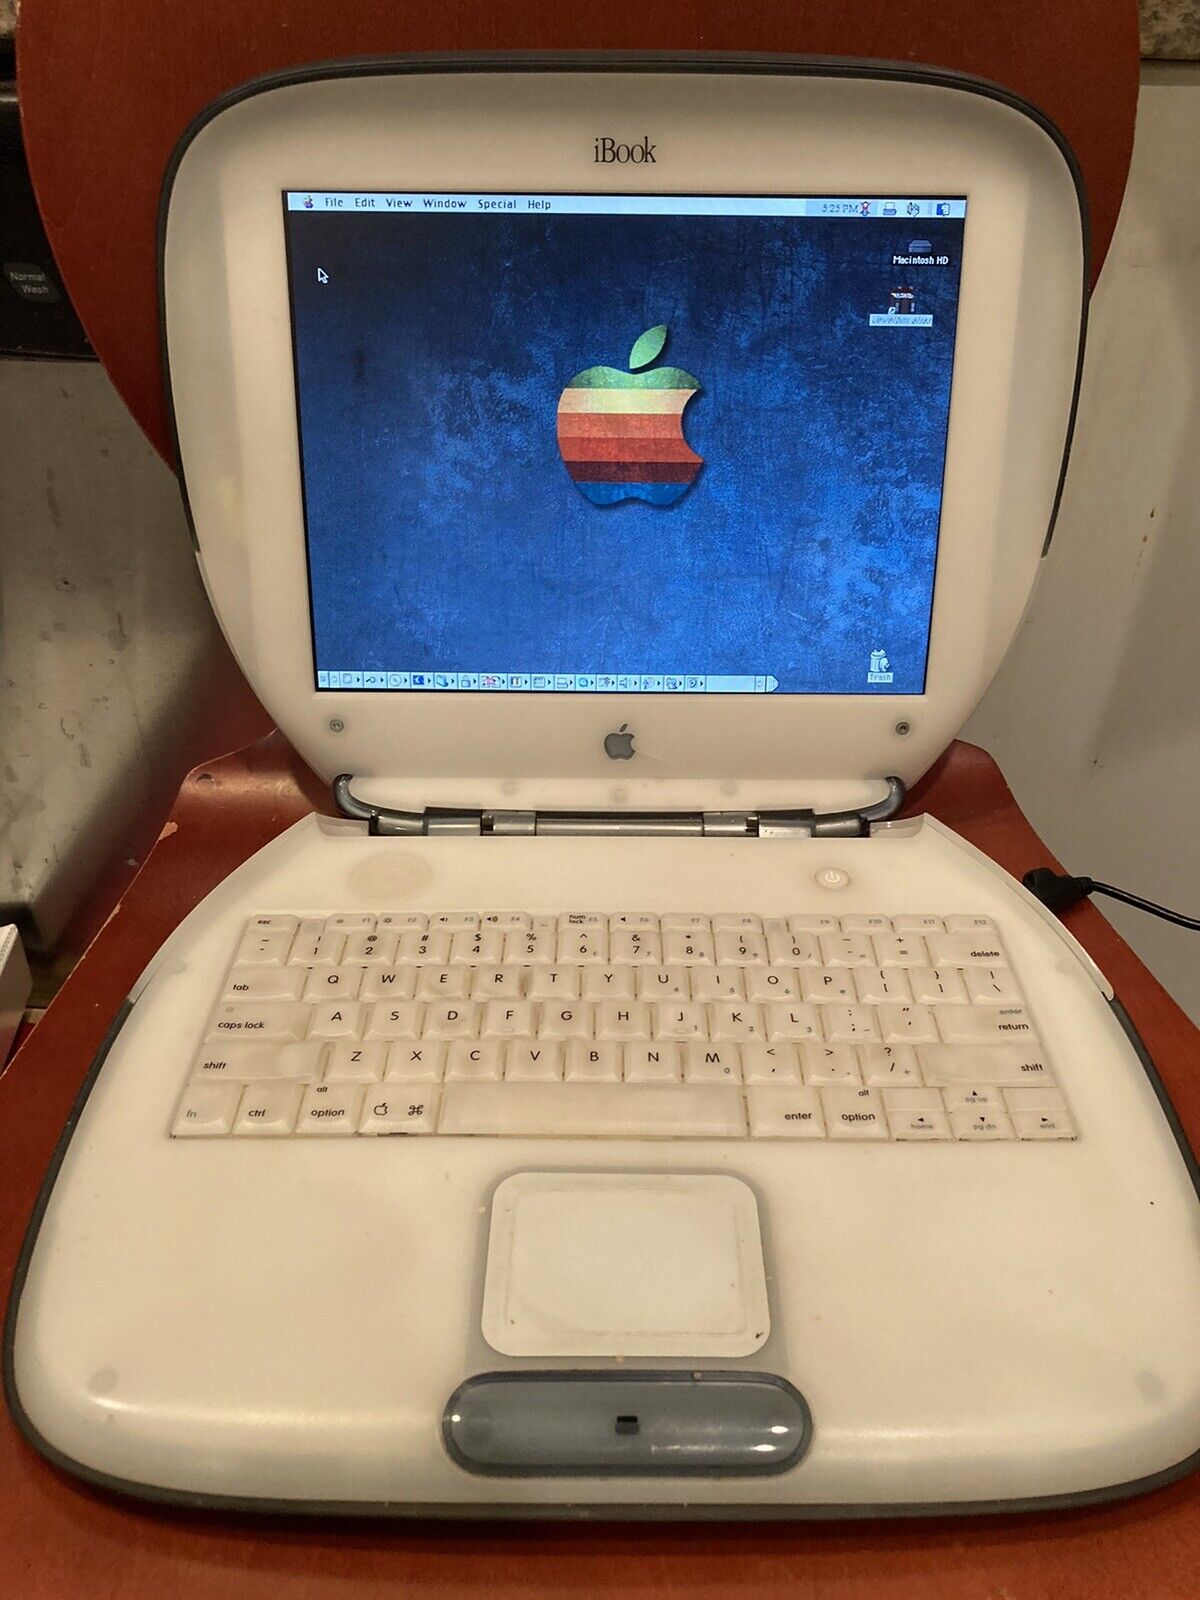 Vintage Apple iBook G3 Graphite Clamshell 466mhz Firewire OS 9 & 10